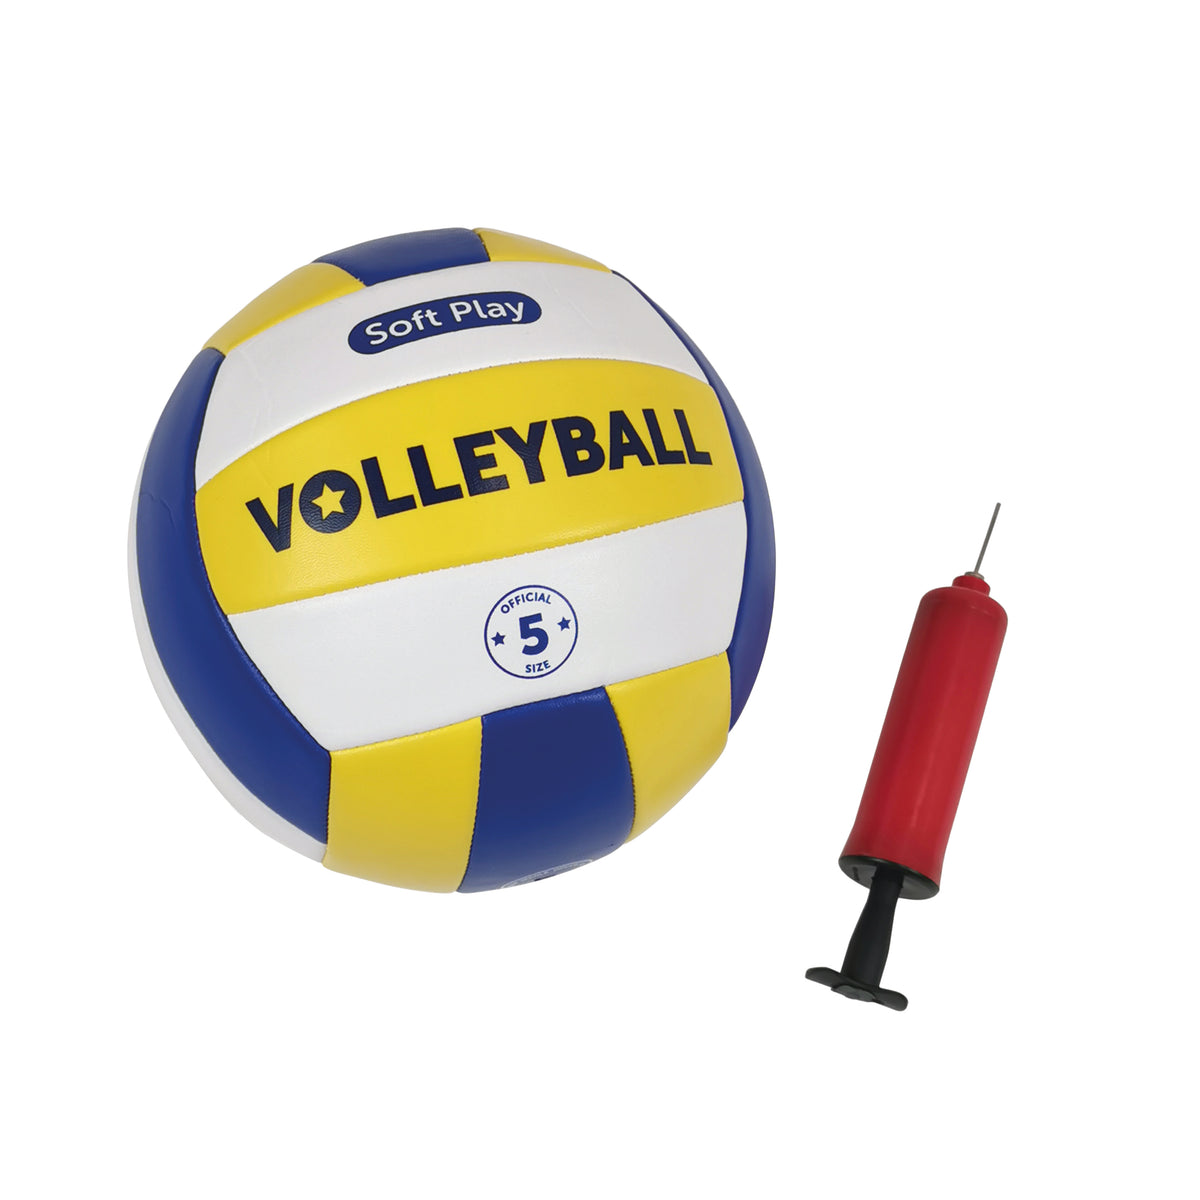 Volleyball Set with 6m Net